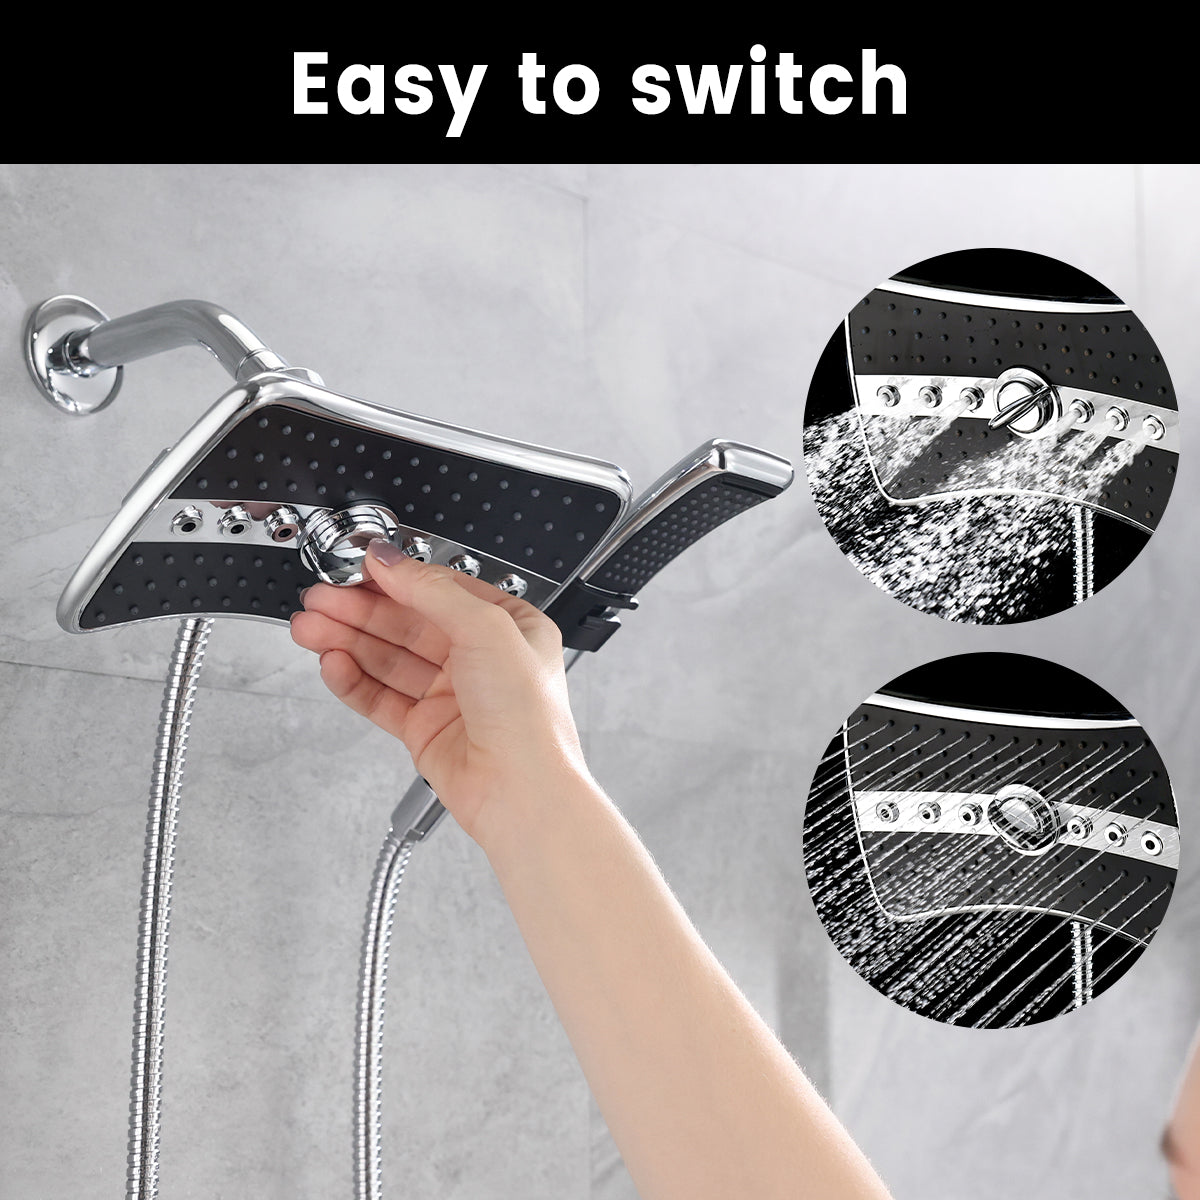 BRIGHT SHOWERS Dual Shower Head Combo Set, Handheld Showerhead Rainfall Shower Head Combo, 60 Inch Long Stainless Steel Shower Hose (PSS3919)